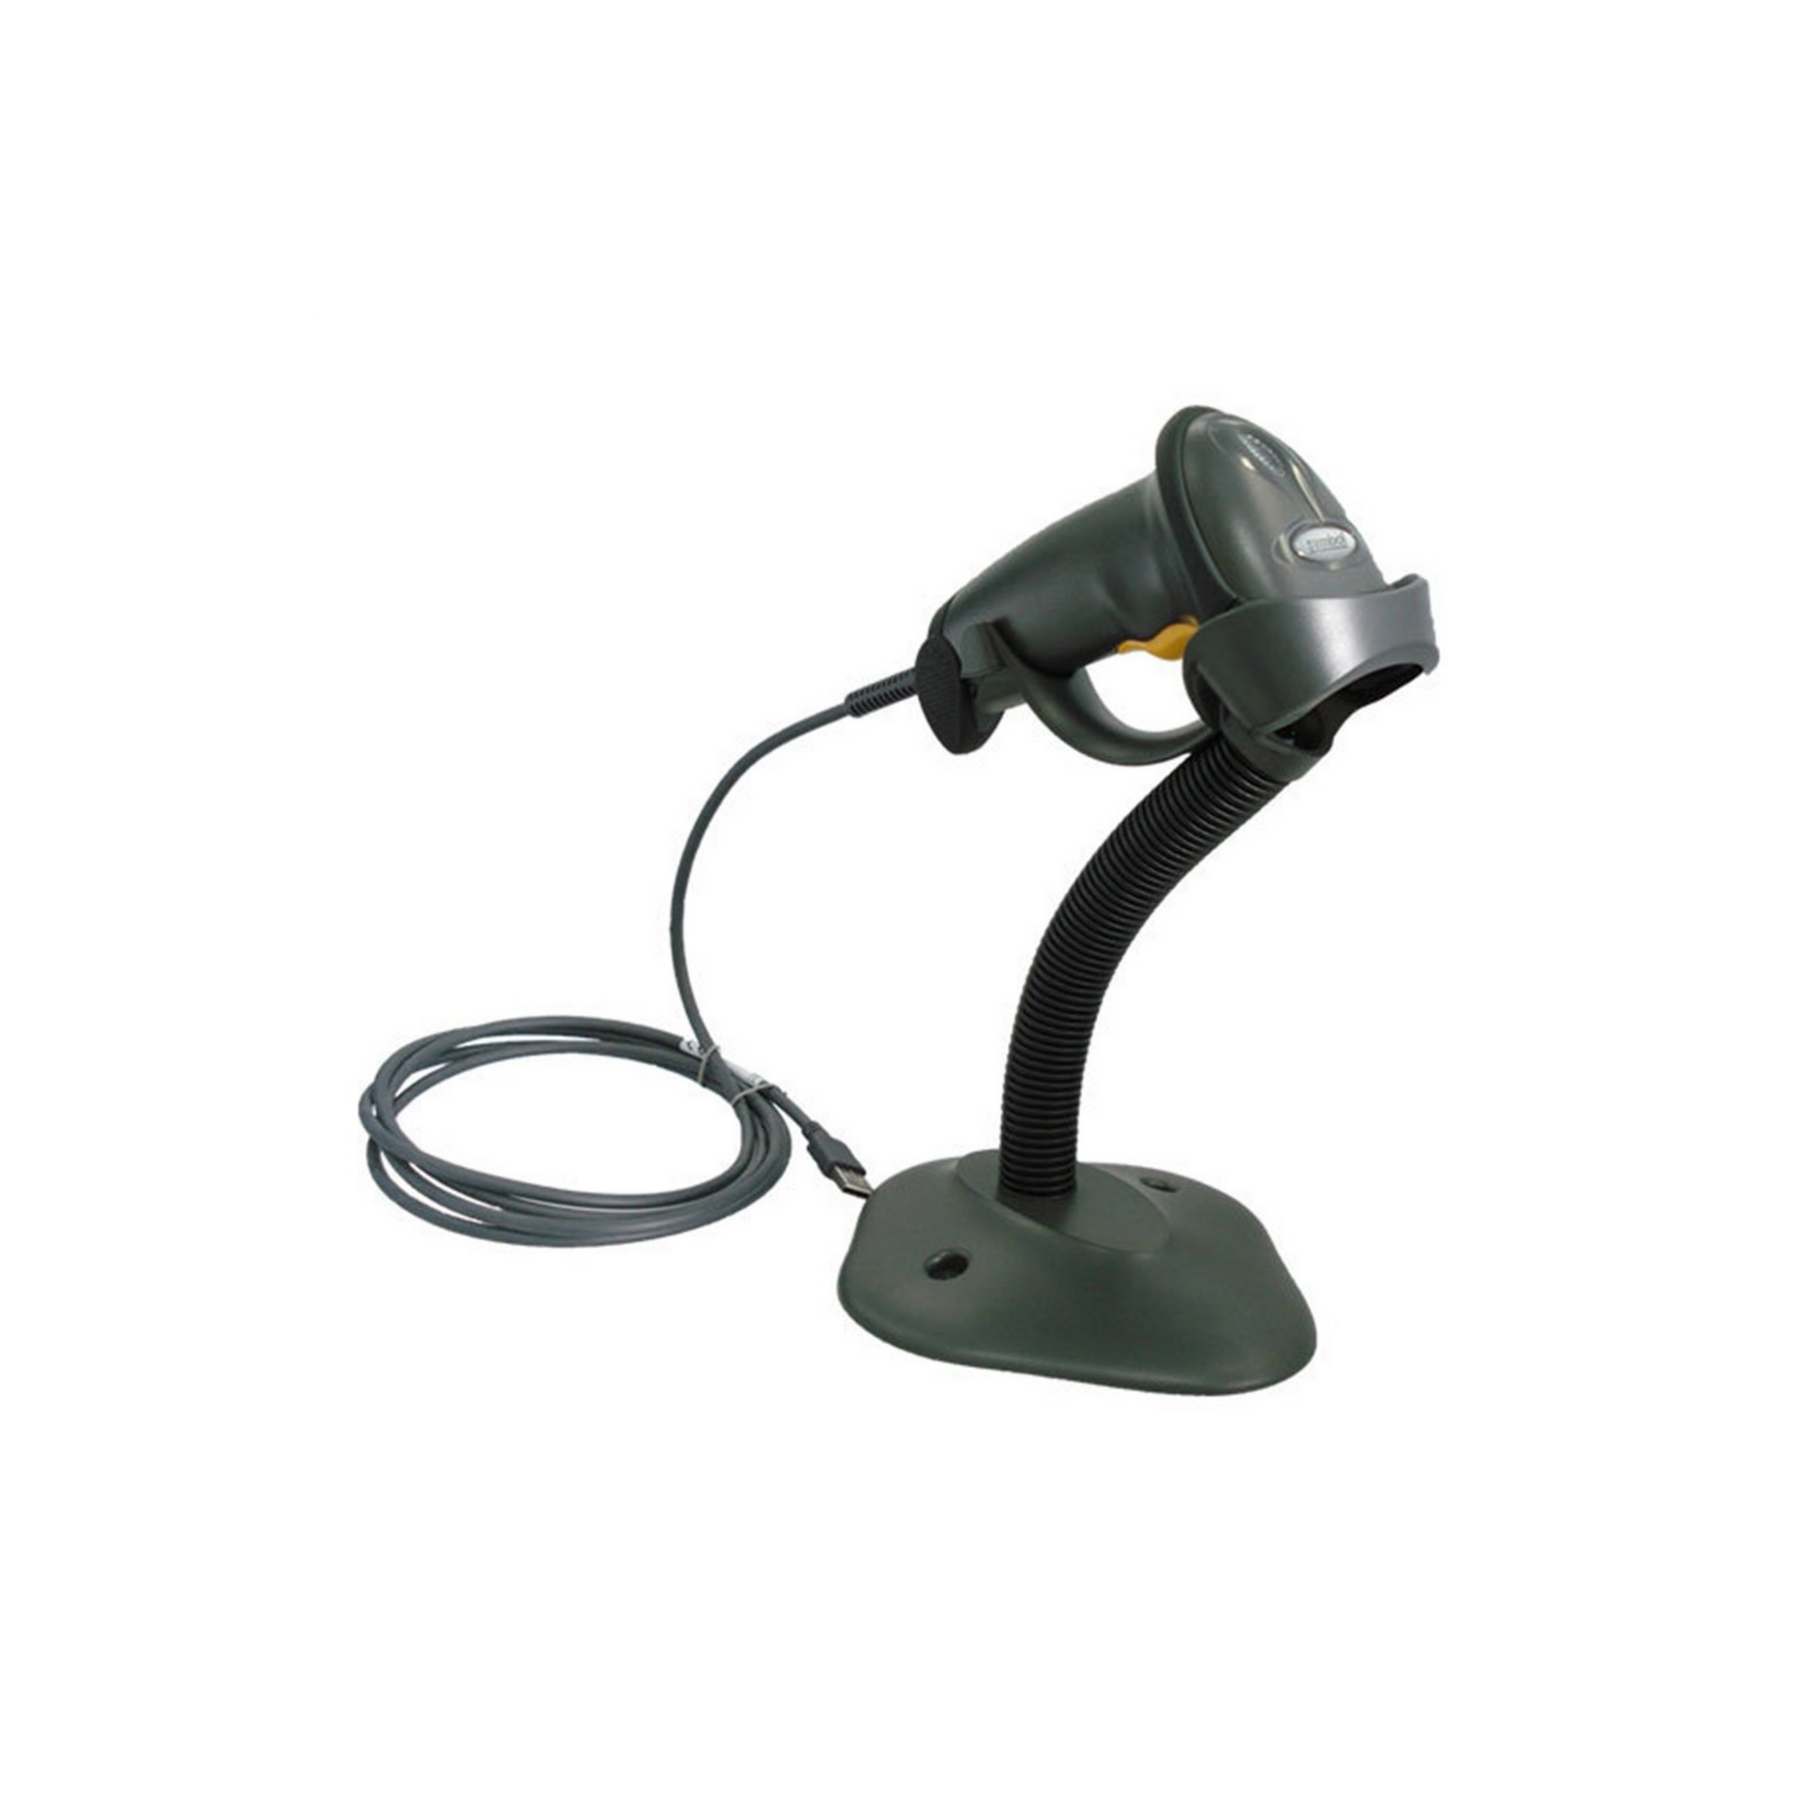 Zebra EVM, LS2208, Usb(PC) Kit, Includes cable and stand, North America only, (Black)